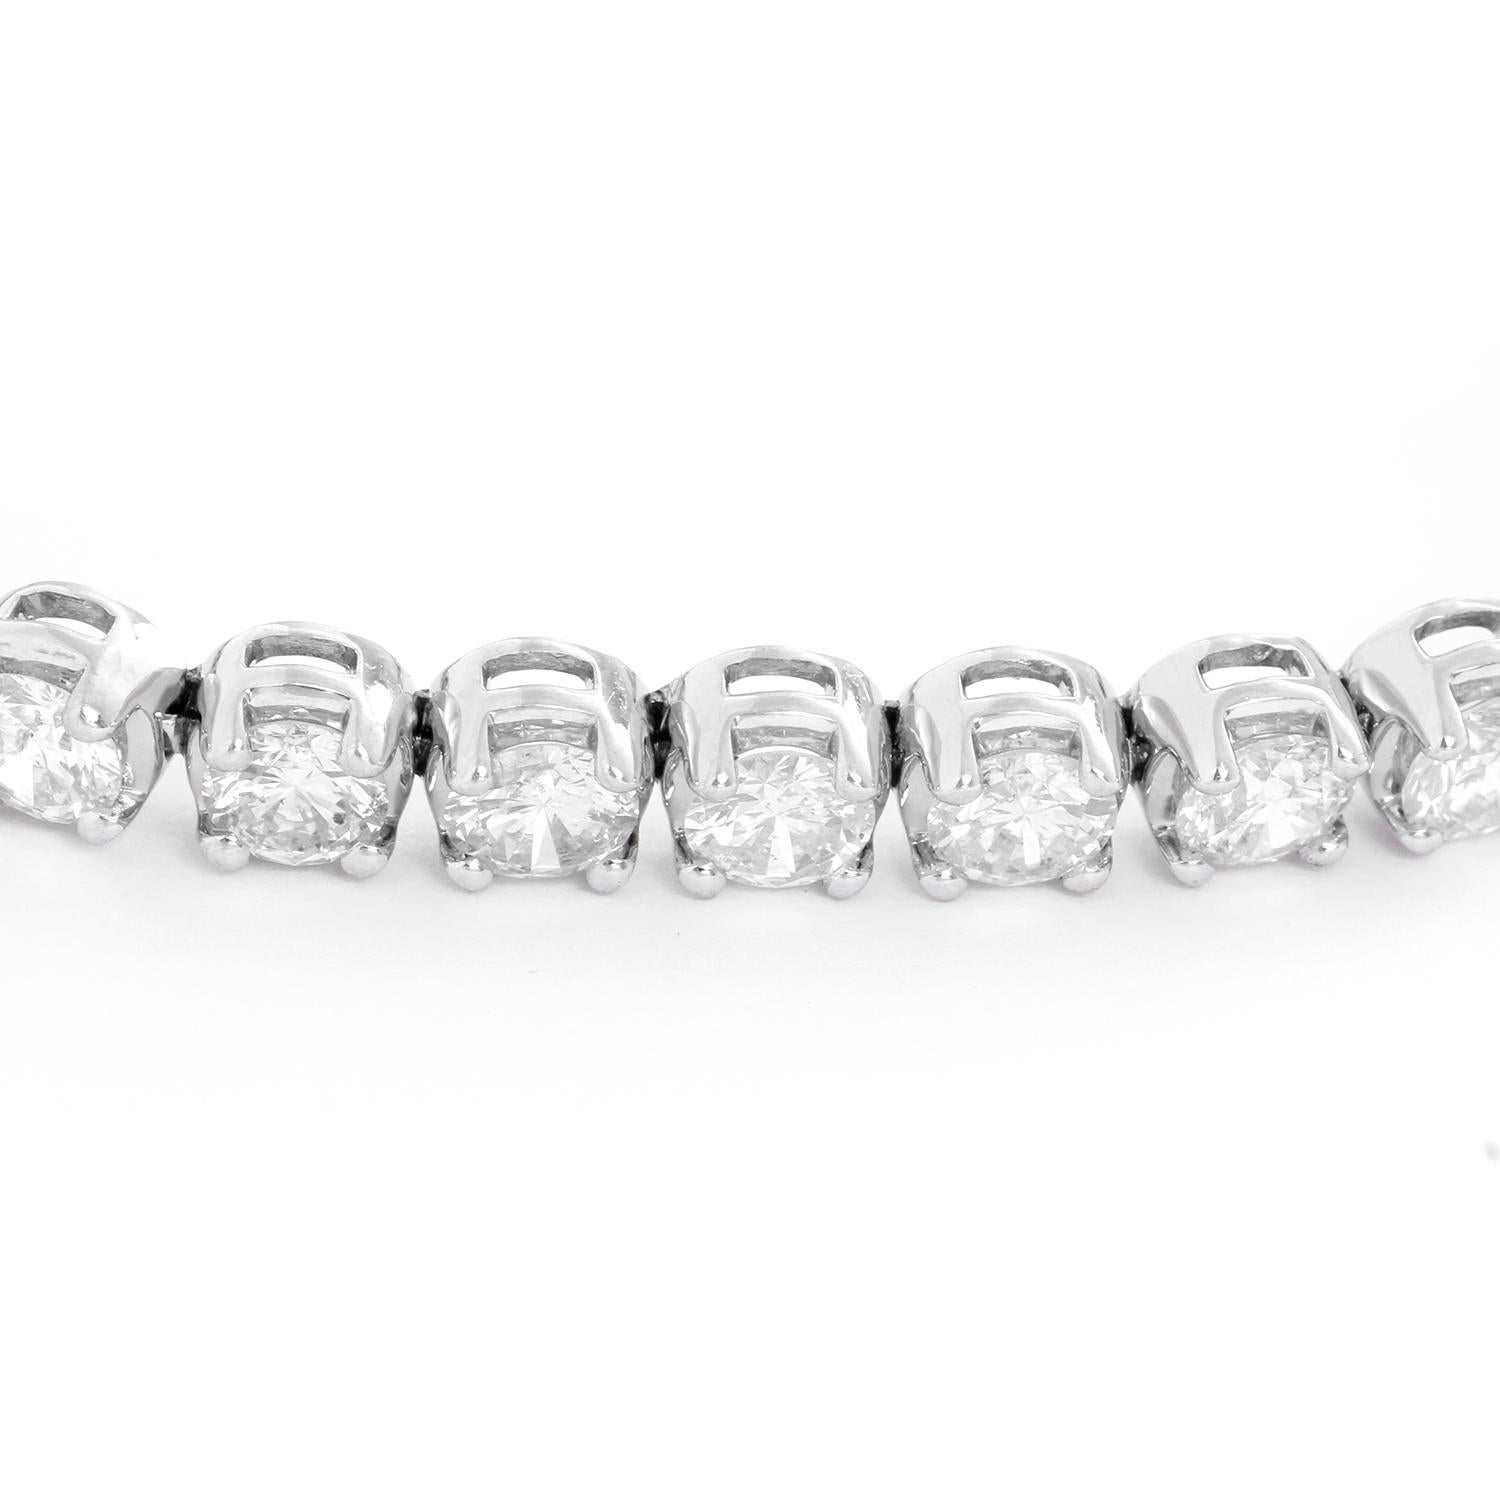 18K White gold Tennis Bracelet 12.09 cts - Crafted in 18K White gold with  30 round brilliant cut  diamonds weighing 12.09 cts.  Color G-H  - Clarity SI2-SI3. Truly stunning and one of a kind.  7 inches long. Total grams 21.2.